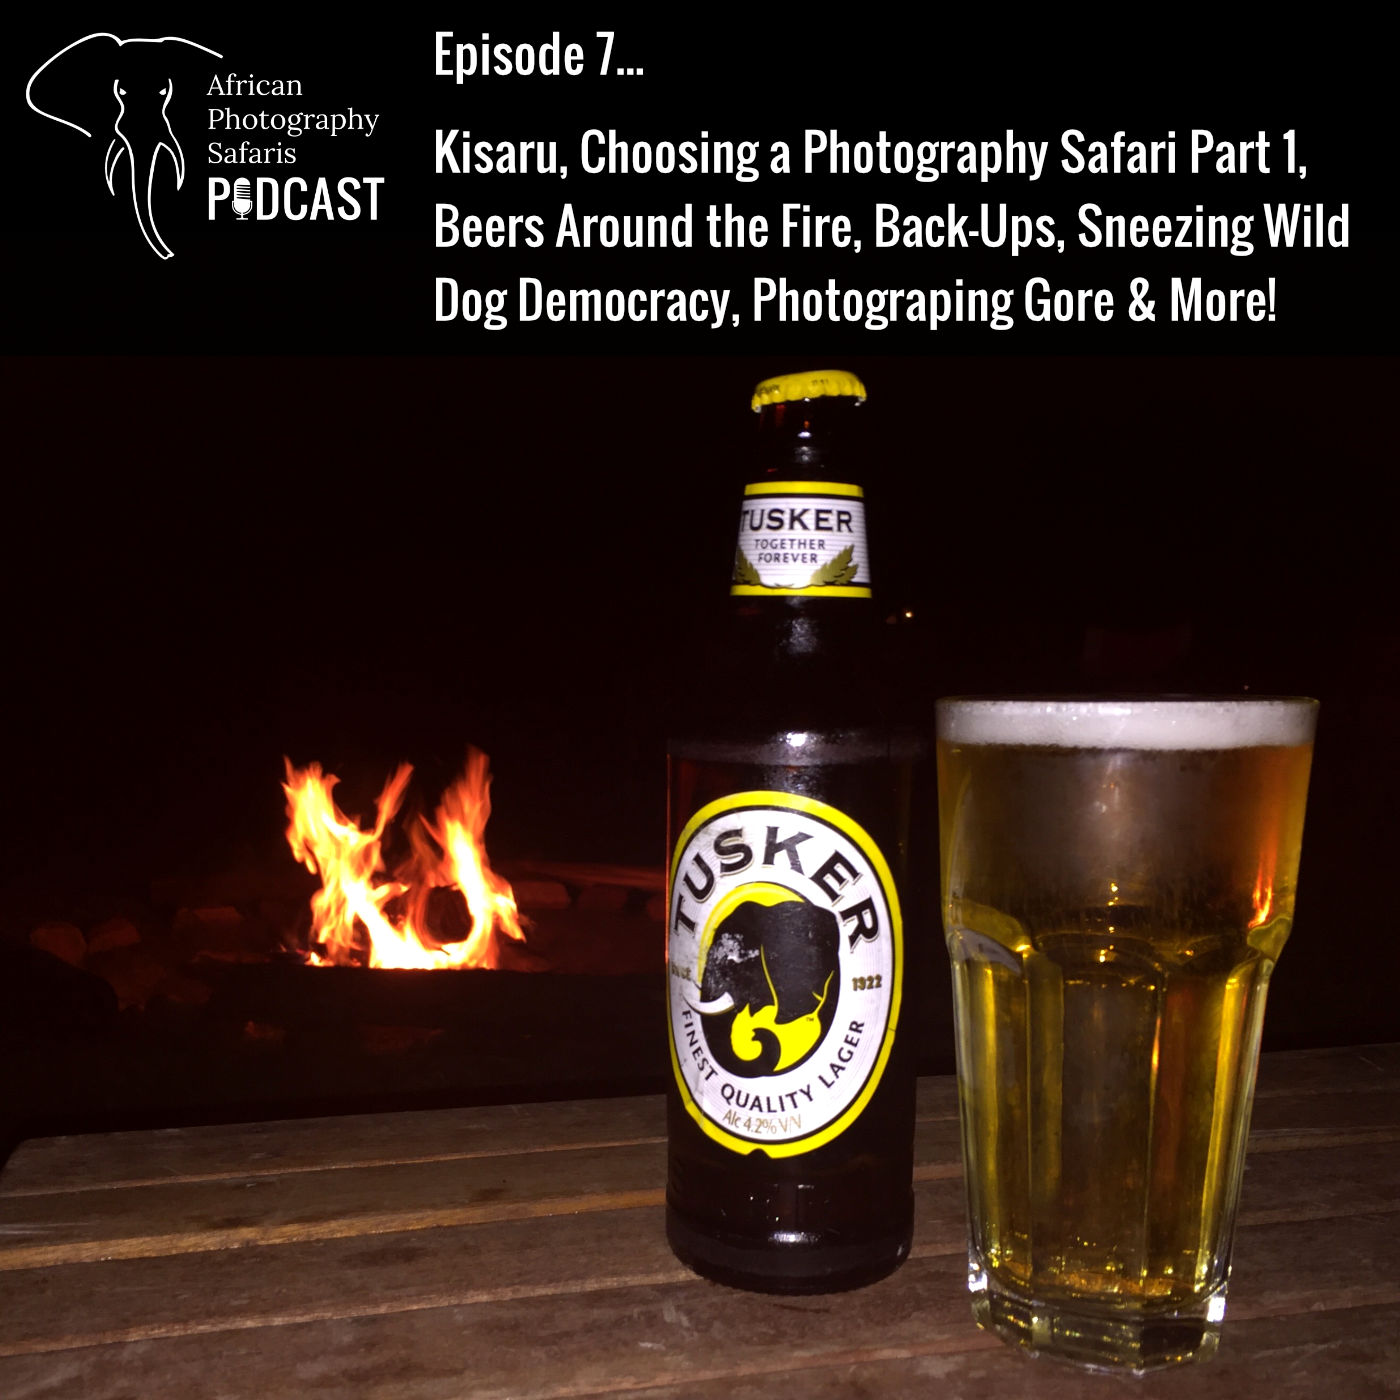 Episode 7 - Kisaru, Choosing a Photography Safari Part 1, Beers Around the Fire, Back-Ups, Sneezing Wild Dog Democracy, Photographing Gore & More